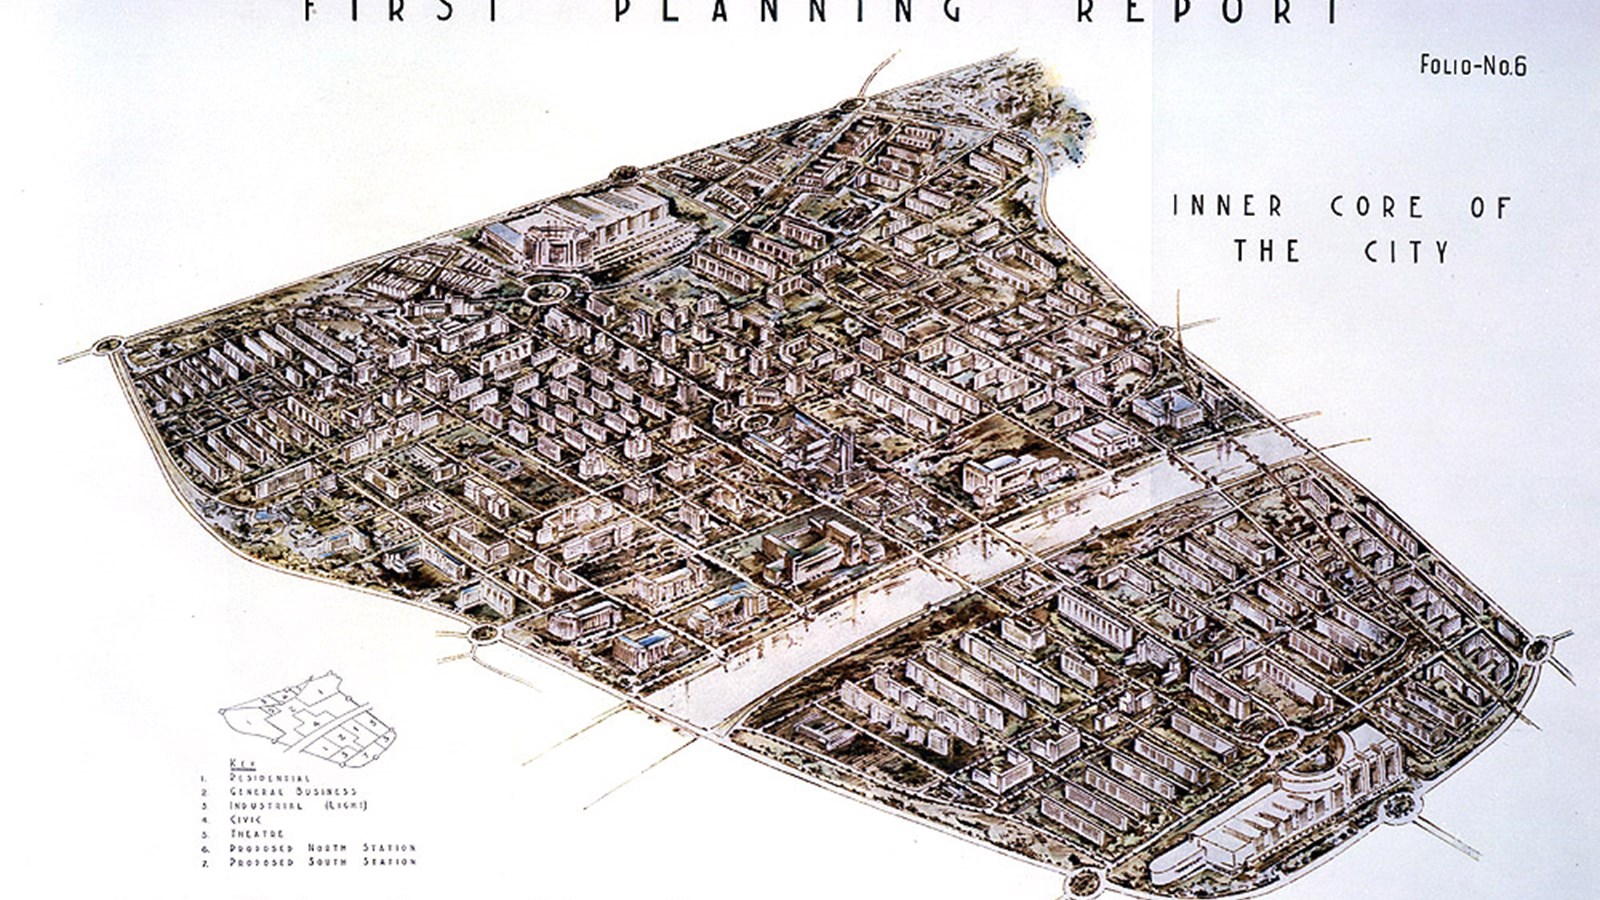 A first planning report drawing of the inner core of the City which includes buildings such as residential, business, theatre and civic as well as streets and roads.